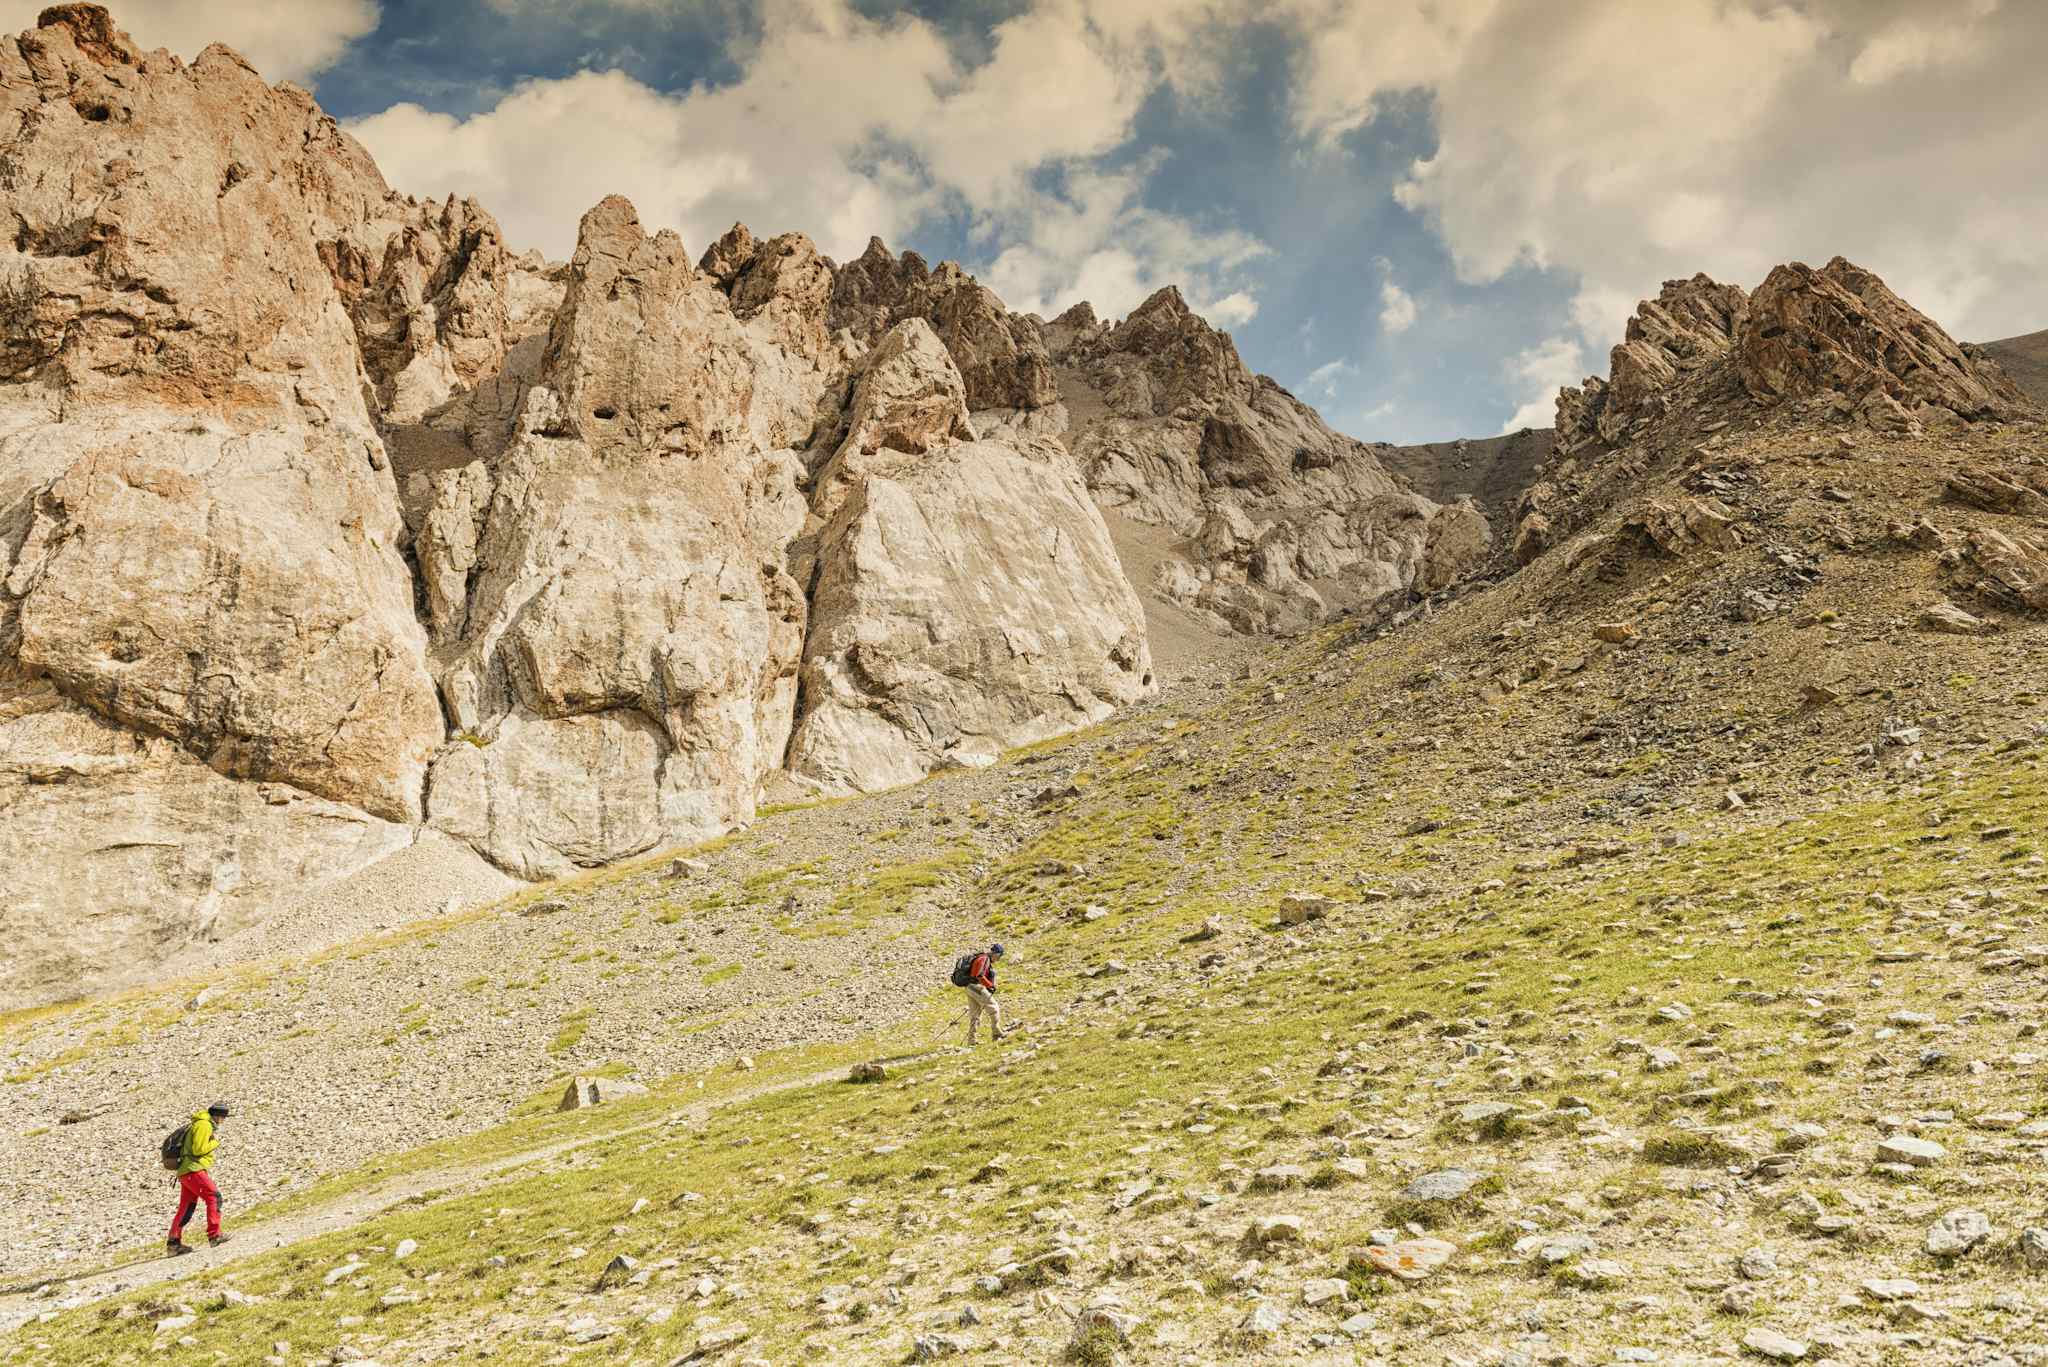 Hiking in the Jukku Valley of the Tian Shan, Kyrgyzstan. Photo: Nomad's Land.